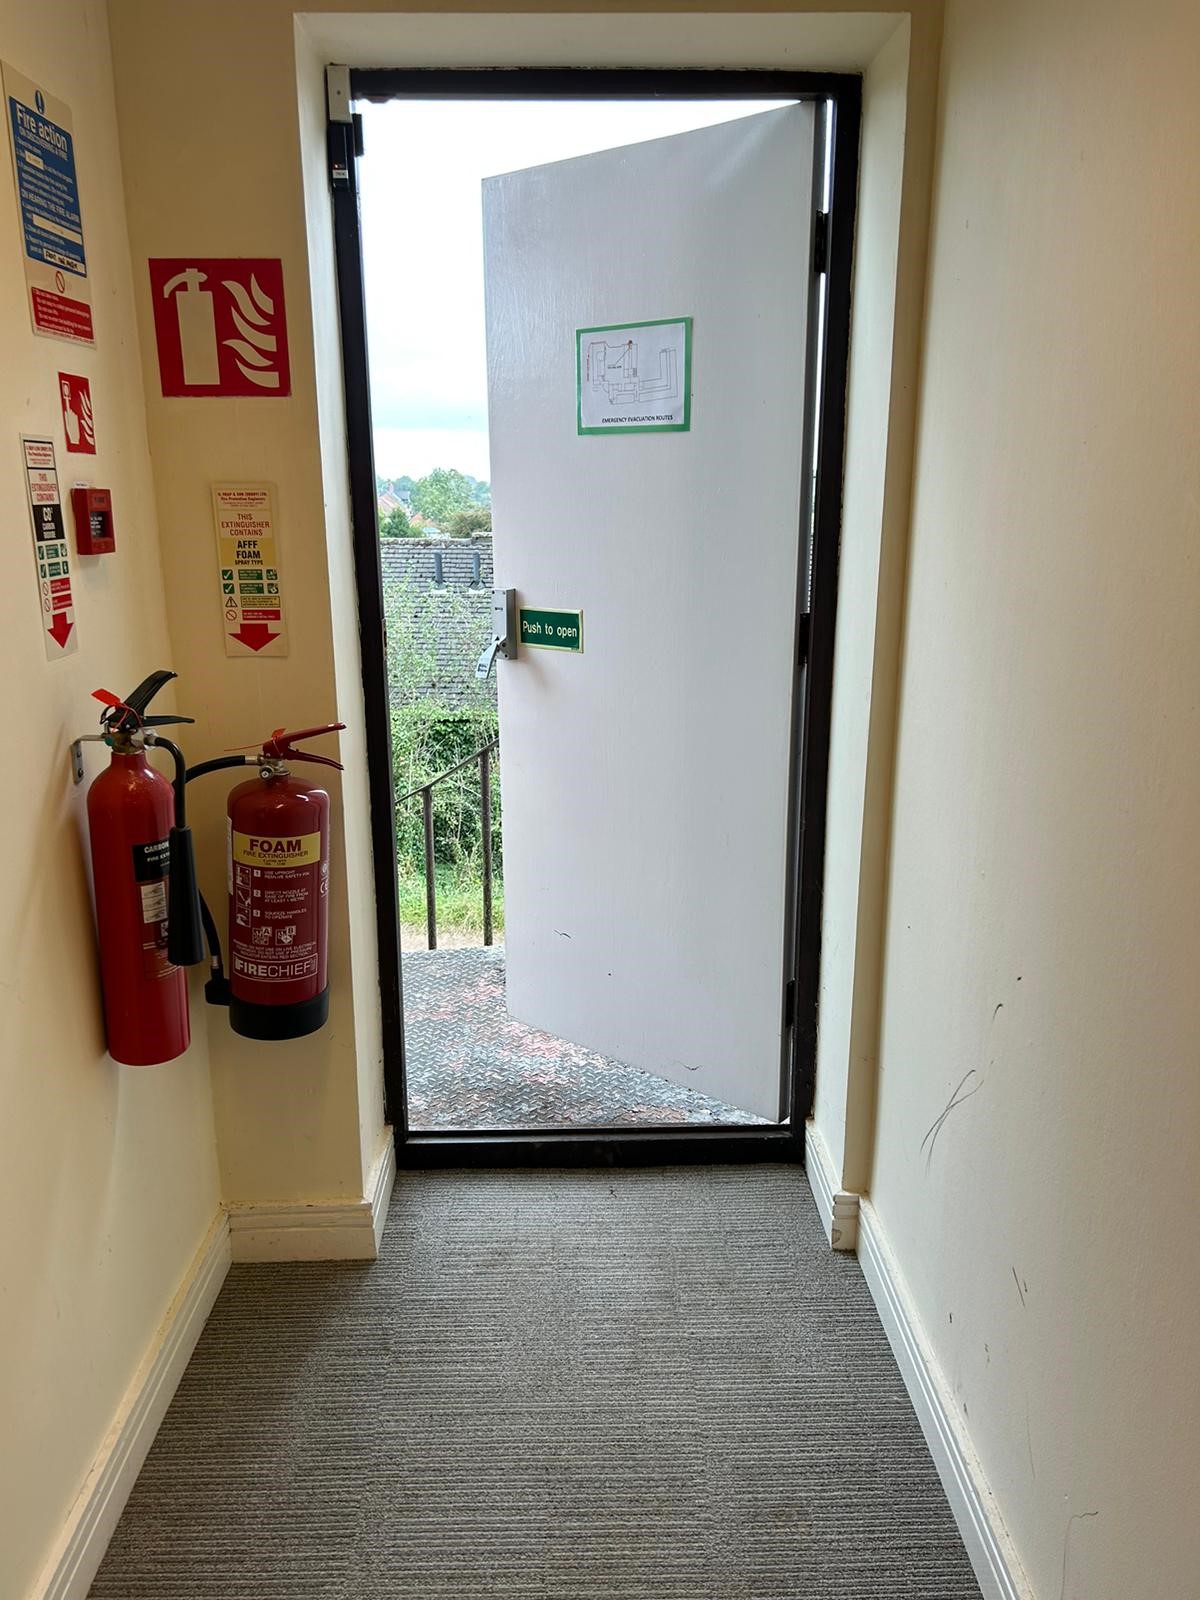 Fire exit and fire doors